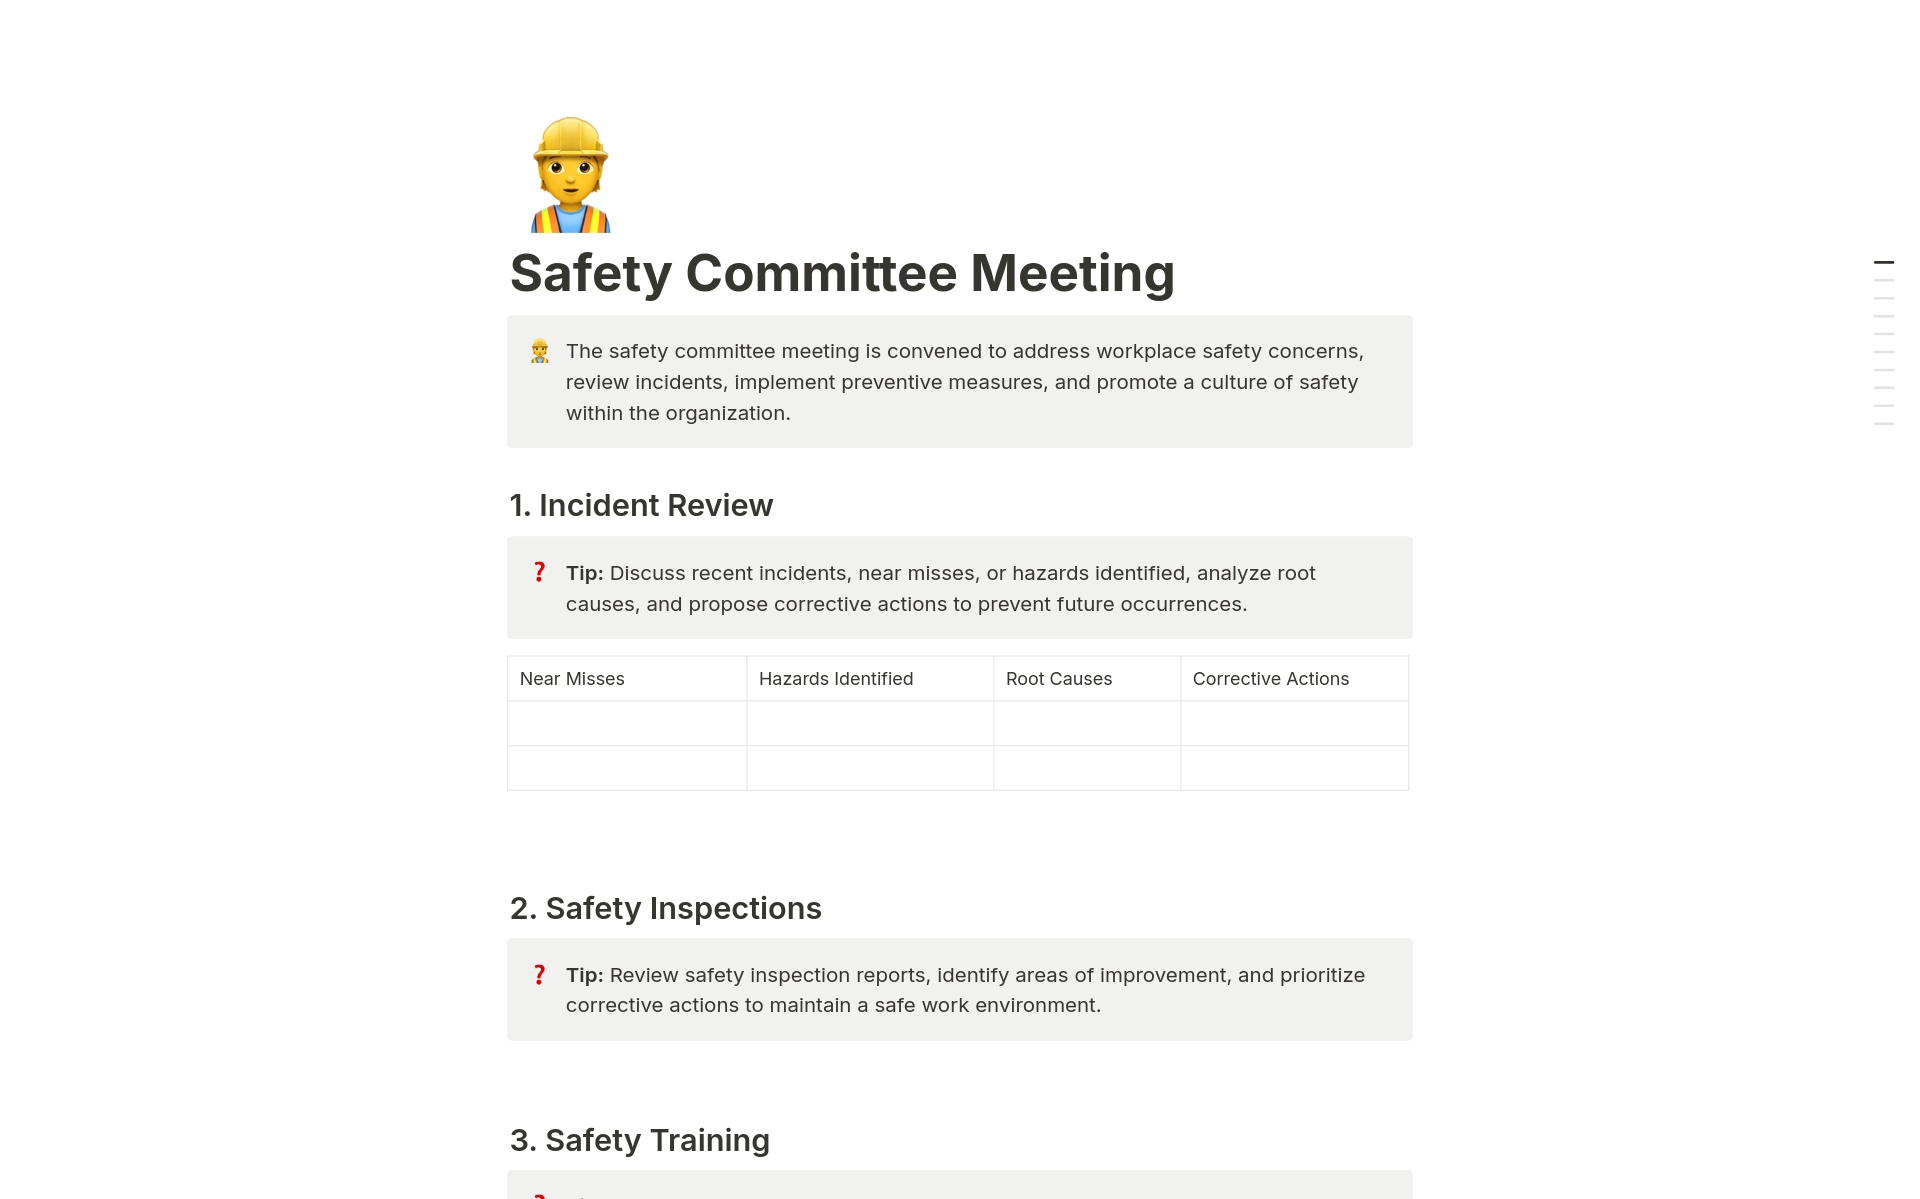 The safety committee meeting is convened to address workplace safety concerns, review incidents, implement preventive measures, and promote a culture of safety within the organization.